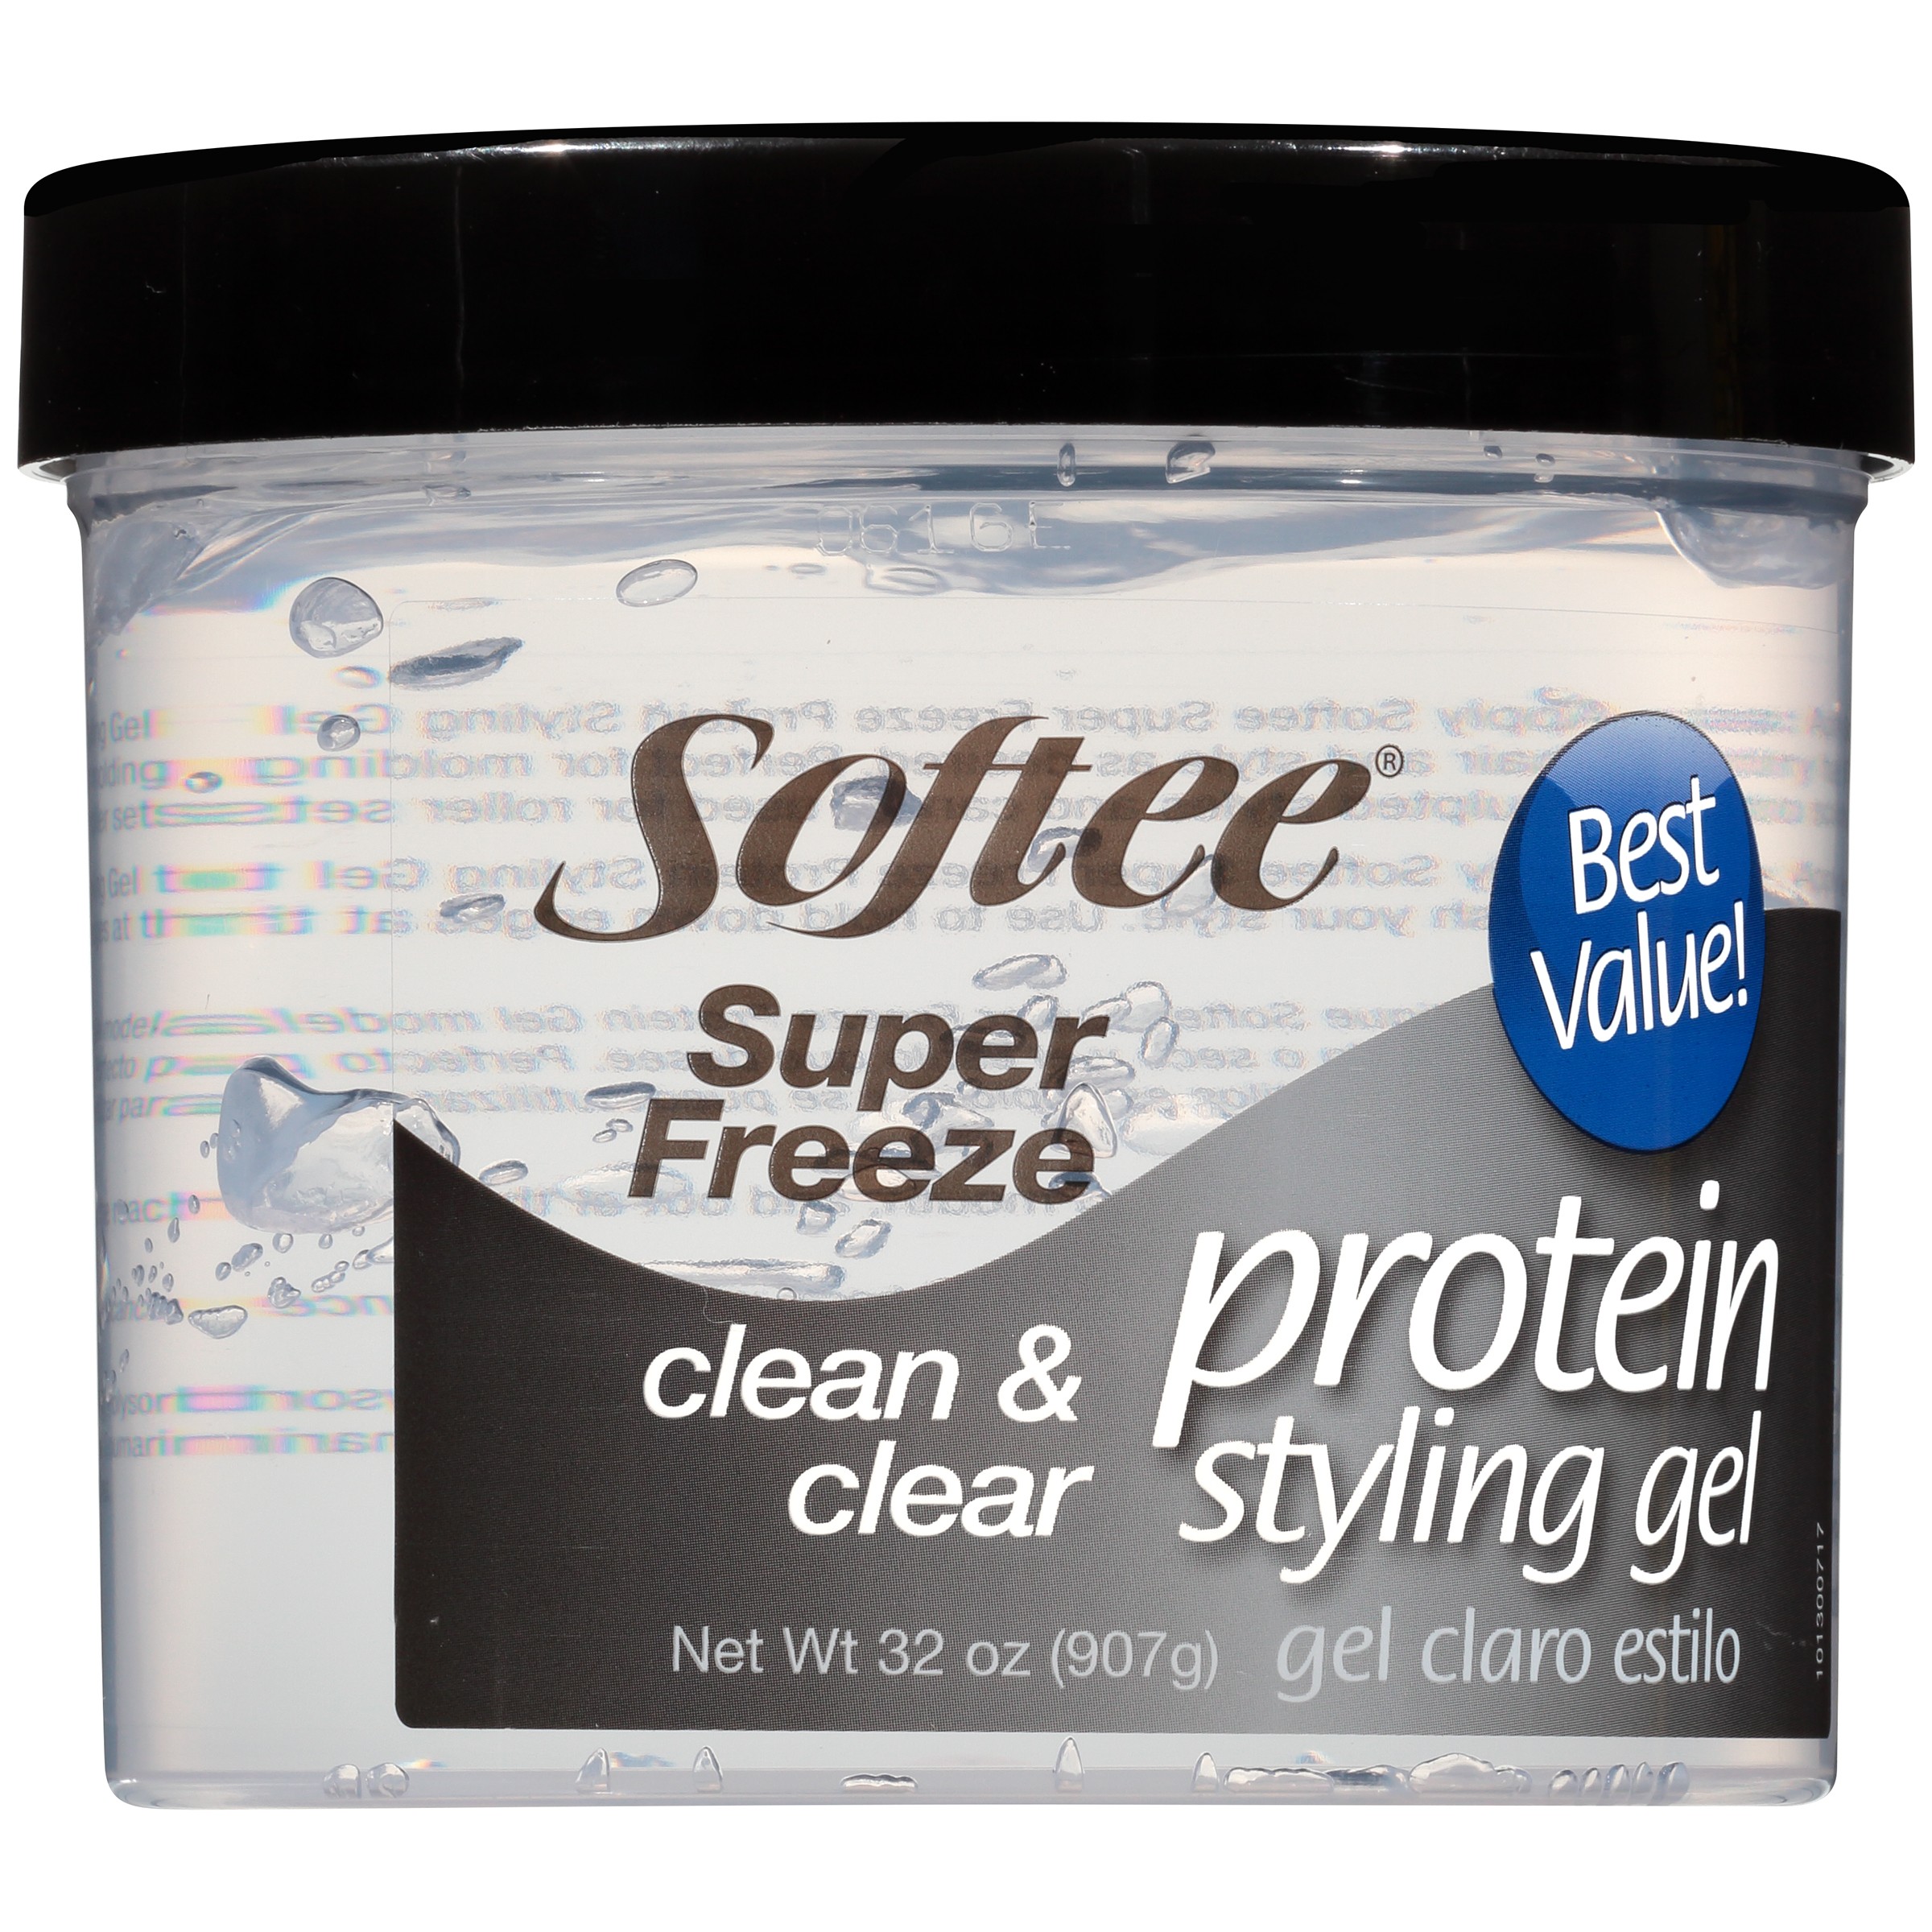 Softee Super Freeze Protein Styling Gel 32 oz. Jar, No Flake, Strengthens Hair,  Unisex - image 5 of 6